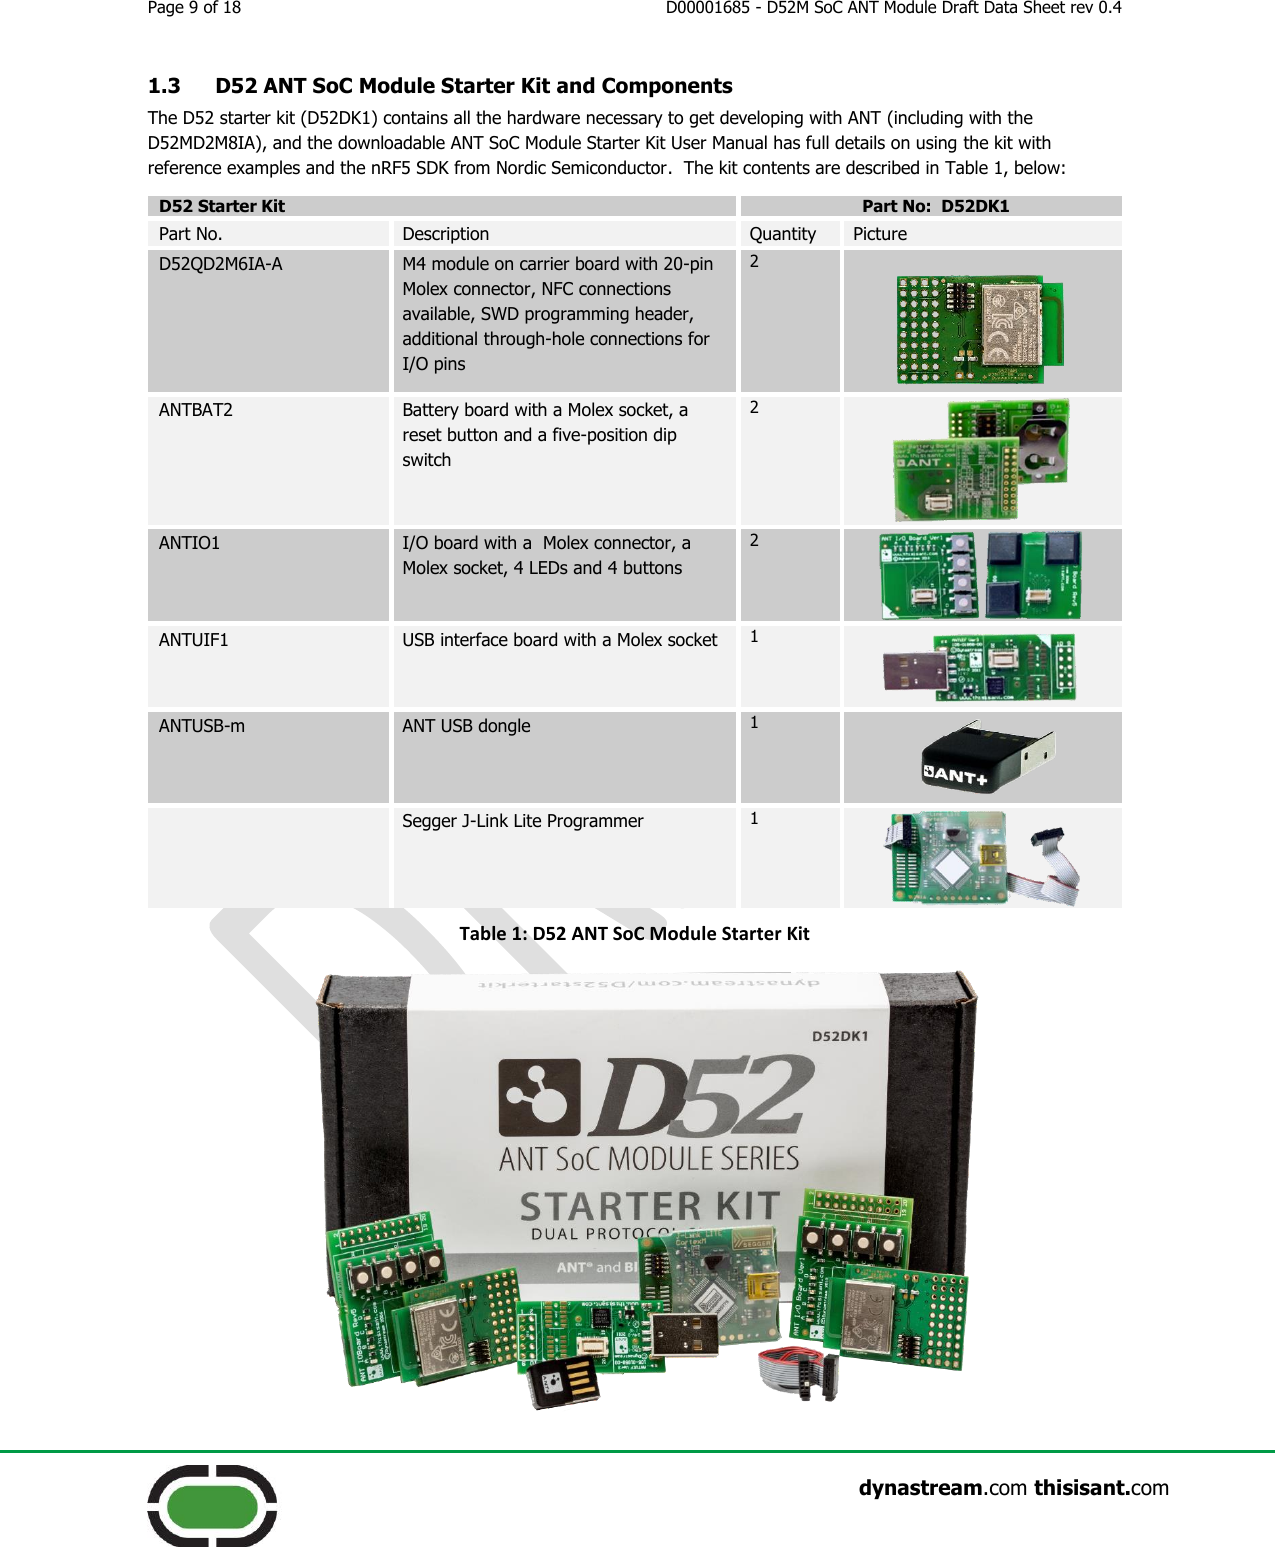 Page 9 of 18  D00001685 - D52M SoC ANT Module Draft Data Sheet rev 0.4                    dynastream.com thisisant.com 1.3 D52 ANT SoC Module Starter Kit and Components The D52 starter kit (D52DK1) contains all the hardware necessary to get developing with ANT (including with the D52MD2M8IA), and the downloadable ANT SoC Module Starter Kit User Manual has full details on using the kit with reference examples and the nRF5 SDK from Nordic Semiconductor.  The kit contents are described in Table 1, below:     D52 Starter Kit Part No:  D52DK1 Part No. Description Quantity Picture D52QD2M6IA-A M4 module on carrier board with 20-pin Molex connector, NFC connections available, SWD programming header, additional through-hole connections for I/O pins  2  ANTBAT2 Battery board with a Molex socket, a reset button and a five-position dip switch 2  ANTIO1 I/O board with a  Molex connector, a Molex socket, 4 LEDs and 4 buttons 2  ANTUIF1 USB interface board with a Molex socket 1  ANTUSB-m ANT USB dongle 1   Segger J-Link Lite Programmer 1  Table 1: D52 ANT SoC Module Starter Kit  